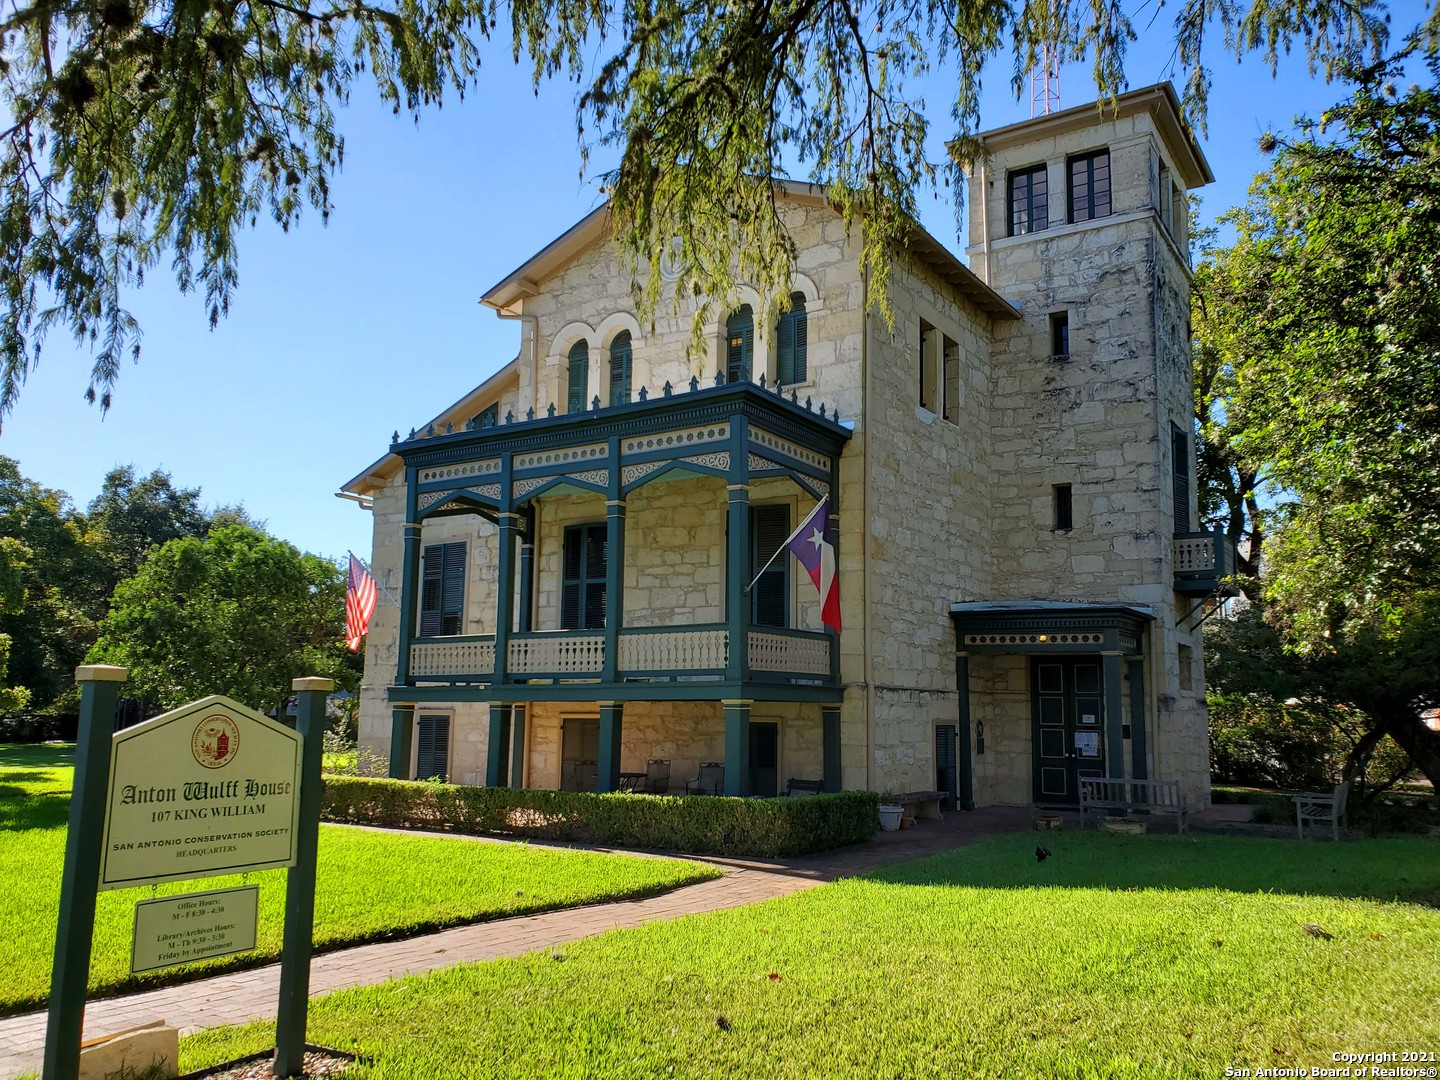 A rare opportunity to own a historic & signature landmark in the King William Historic District at 107 King William St., San Antonio, TX. Known as the Anton Wulff House, the approximately 6,000 SF, 3 story structure was built in 1870, in the Italianate style, of locally quarried limestone block. In use as office since 1964, the property was fully renovated by the San Antonio Conservation Society in 1975 for use as its headquarters, but is now available for conversion back to residential use.  The original floor plan and many historic features remain.  Also included is the 1,400 SF August Stuemke barn, relocated to the site and renovated in 1982. There is a previously historic approved design for a 2,000 SF expansion, for a possible 9,400 SF total improved square footage. The site totals 1.16 acres of land, is Riverwalk adjacent and is bounded by Cesar Chavez Blvd, S. St. Mary's St., King William St. and Washington St. The location is at the gateway entrance to the King William Historic District (Texas' first designated residential historic district) and is walkable to downtown and all the restaurants and amenities of the King William/Southtown District. The property is currently zoned O-2 S (Office), H HE (Historic, Exceptional Landmark), RIO-4 overlay.